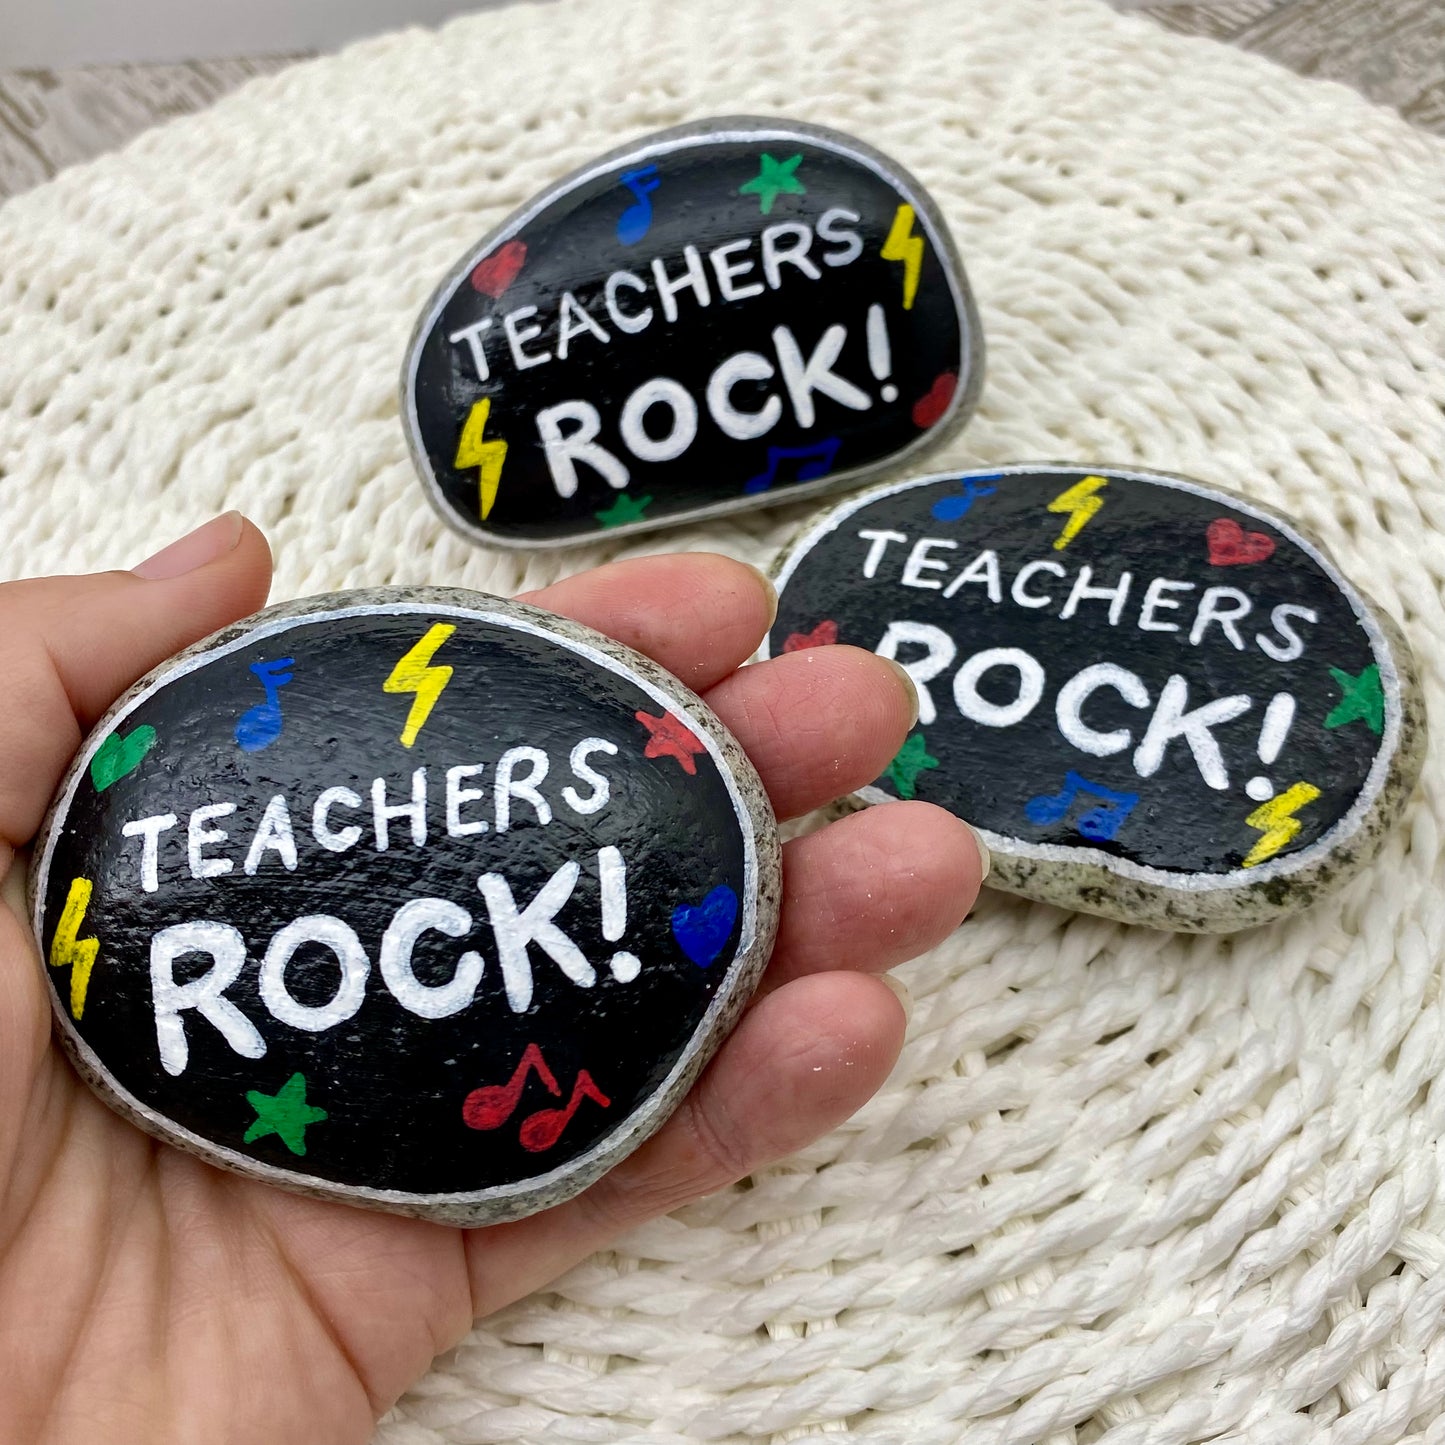 3 stones painted black with rock and roll symbols painted in bright colours and the words "Teachers Rock!" in white